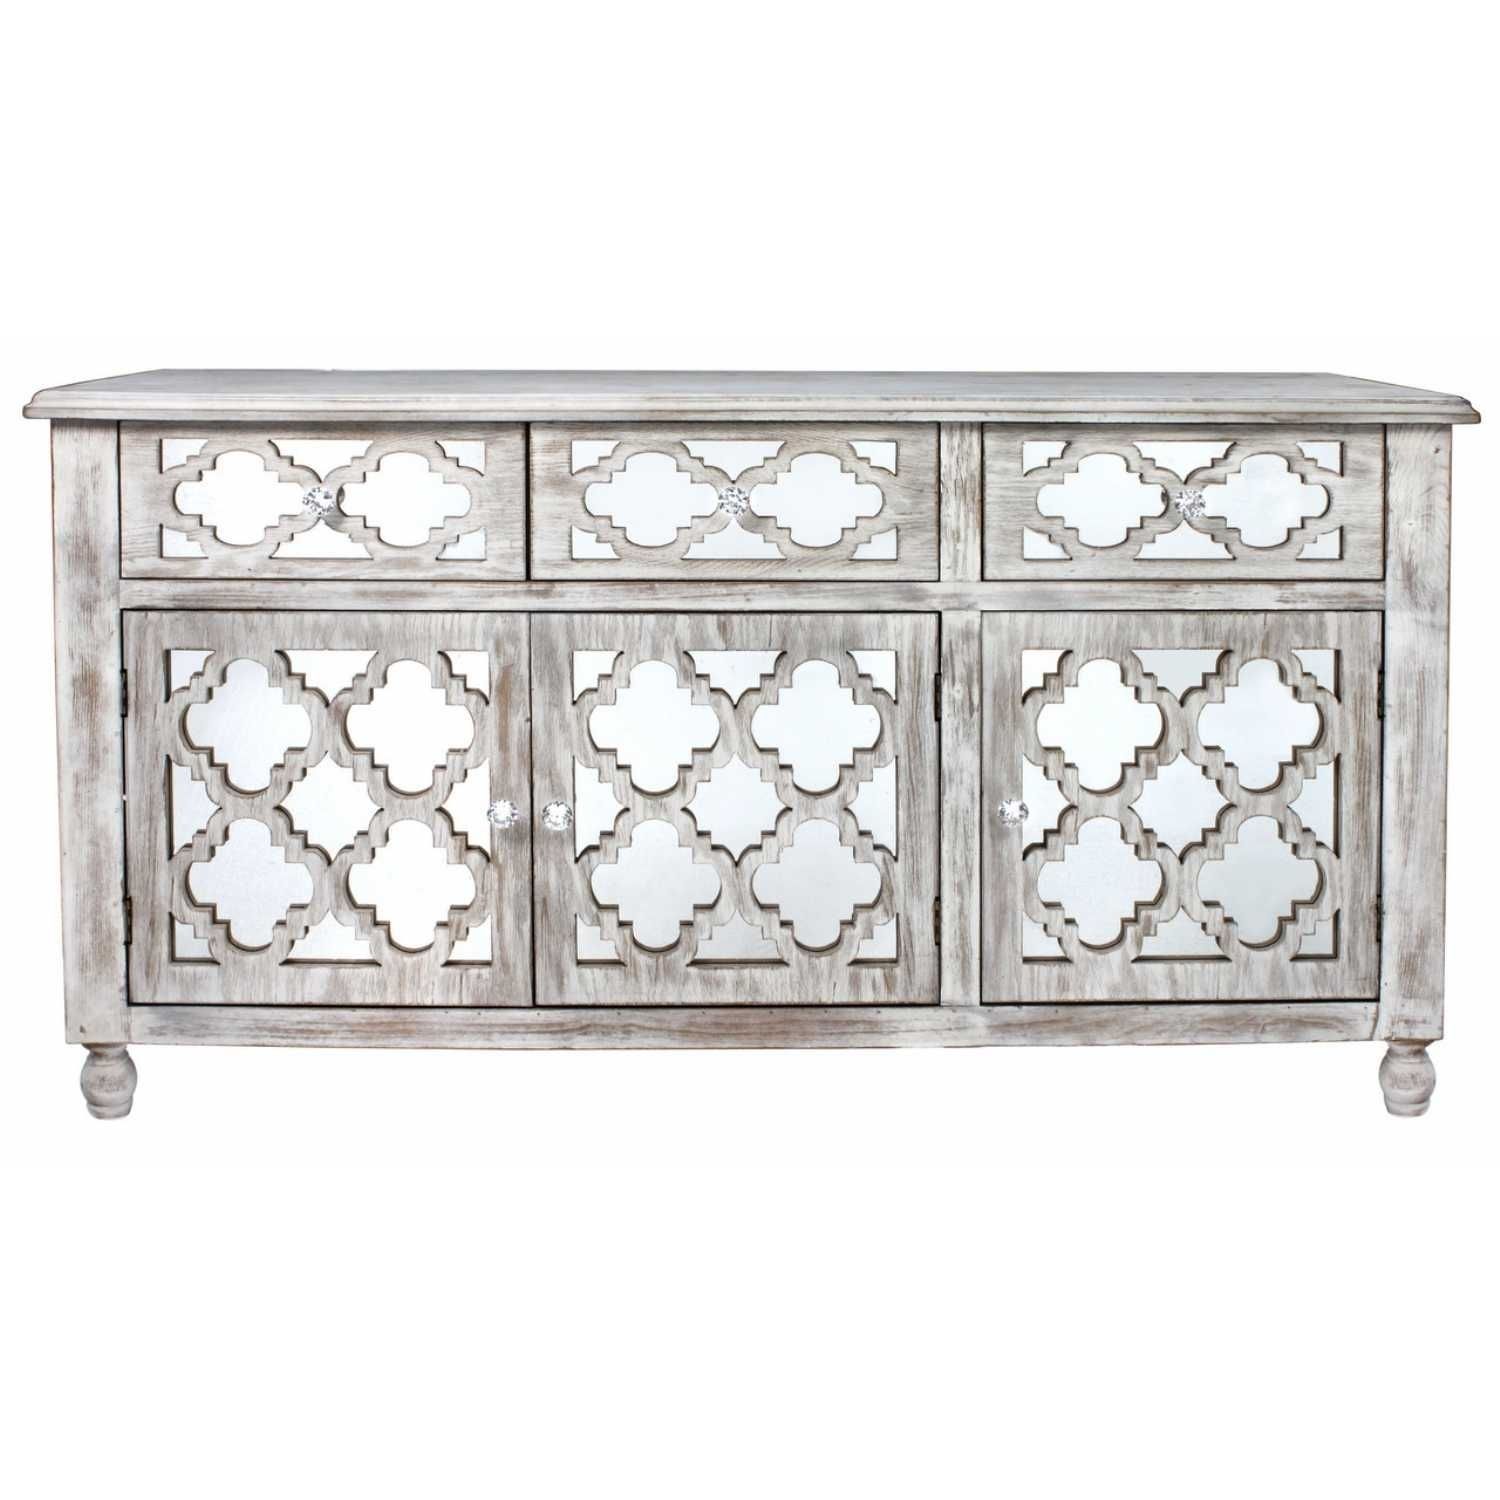 Marrakech Washed Ash Modern Mirrored Glass 3 Door 3 Drawer Cabinet Within White Wash 3 Door 3 Drawer Sideboards (View 20 of 30)